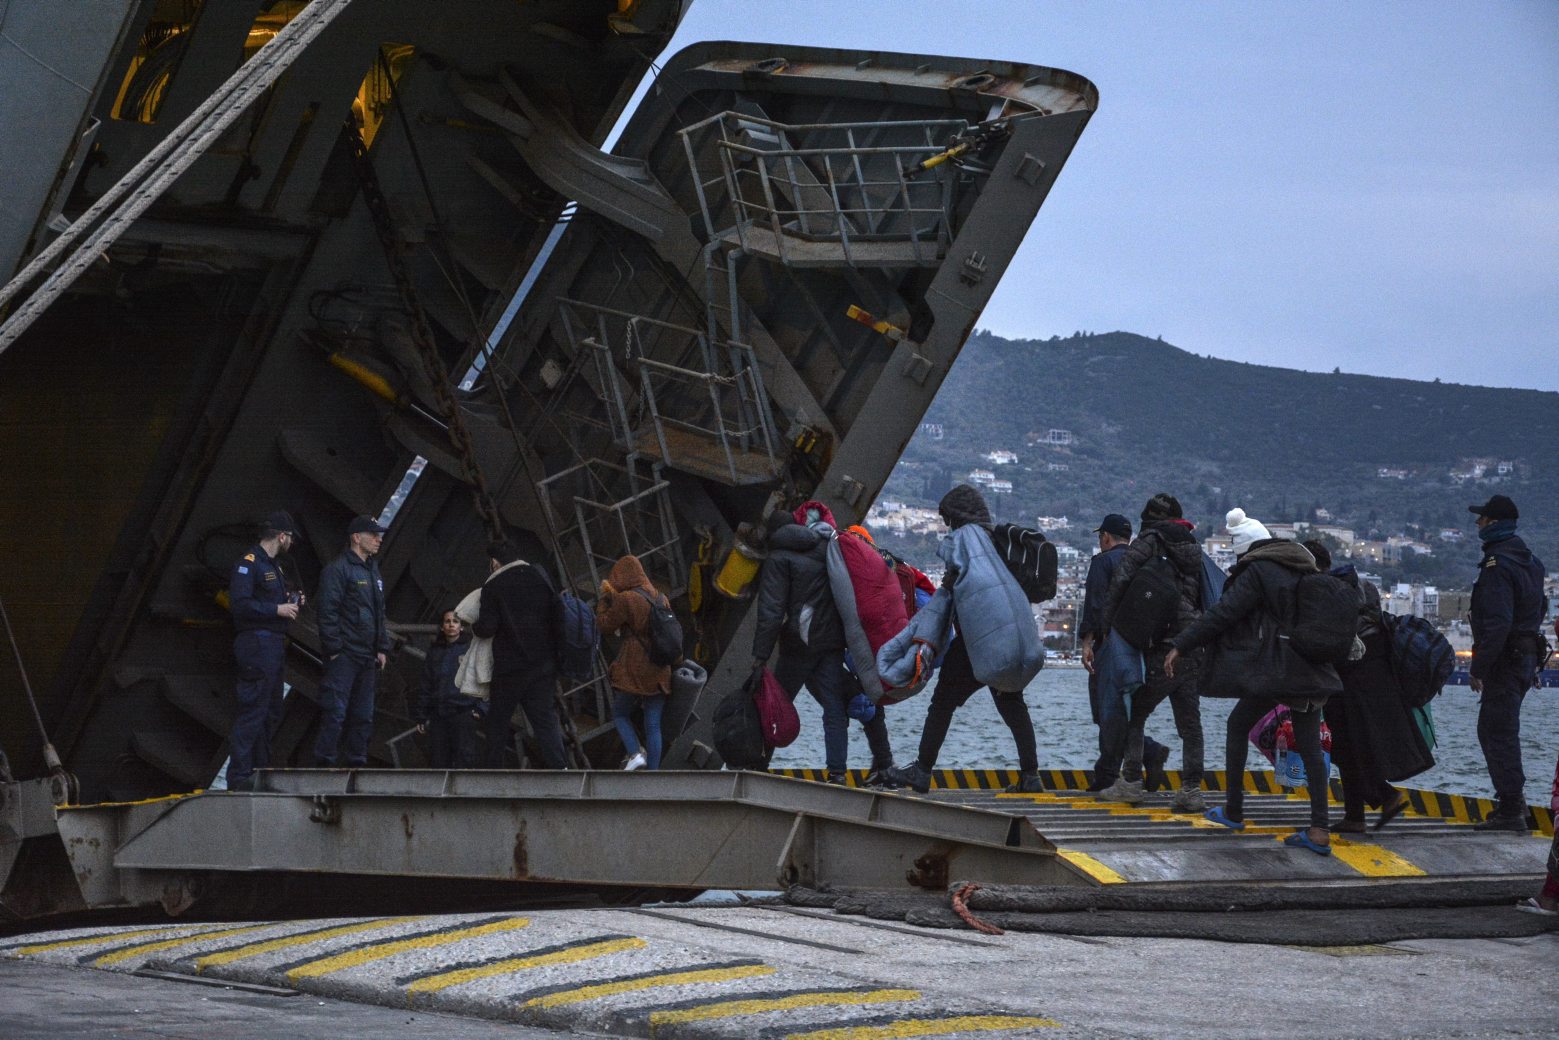 Migrants enter a Greek Navy ship which will accommodate them at the port of Mytilene on the northeastern Aegean island of Lesbos, Greece, on Wednesday, March 4, 2020. Turkey made good on a threat to open its borders and send migrants into Europe last week. In the past few days hundreds of people have headed to Greek islands from the nearby Turkish coast in dinghies. (AP Photo/Panagiotis Balaskas) Greece Turkey Migrants